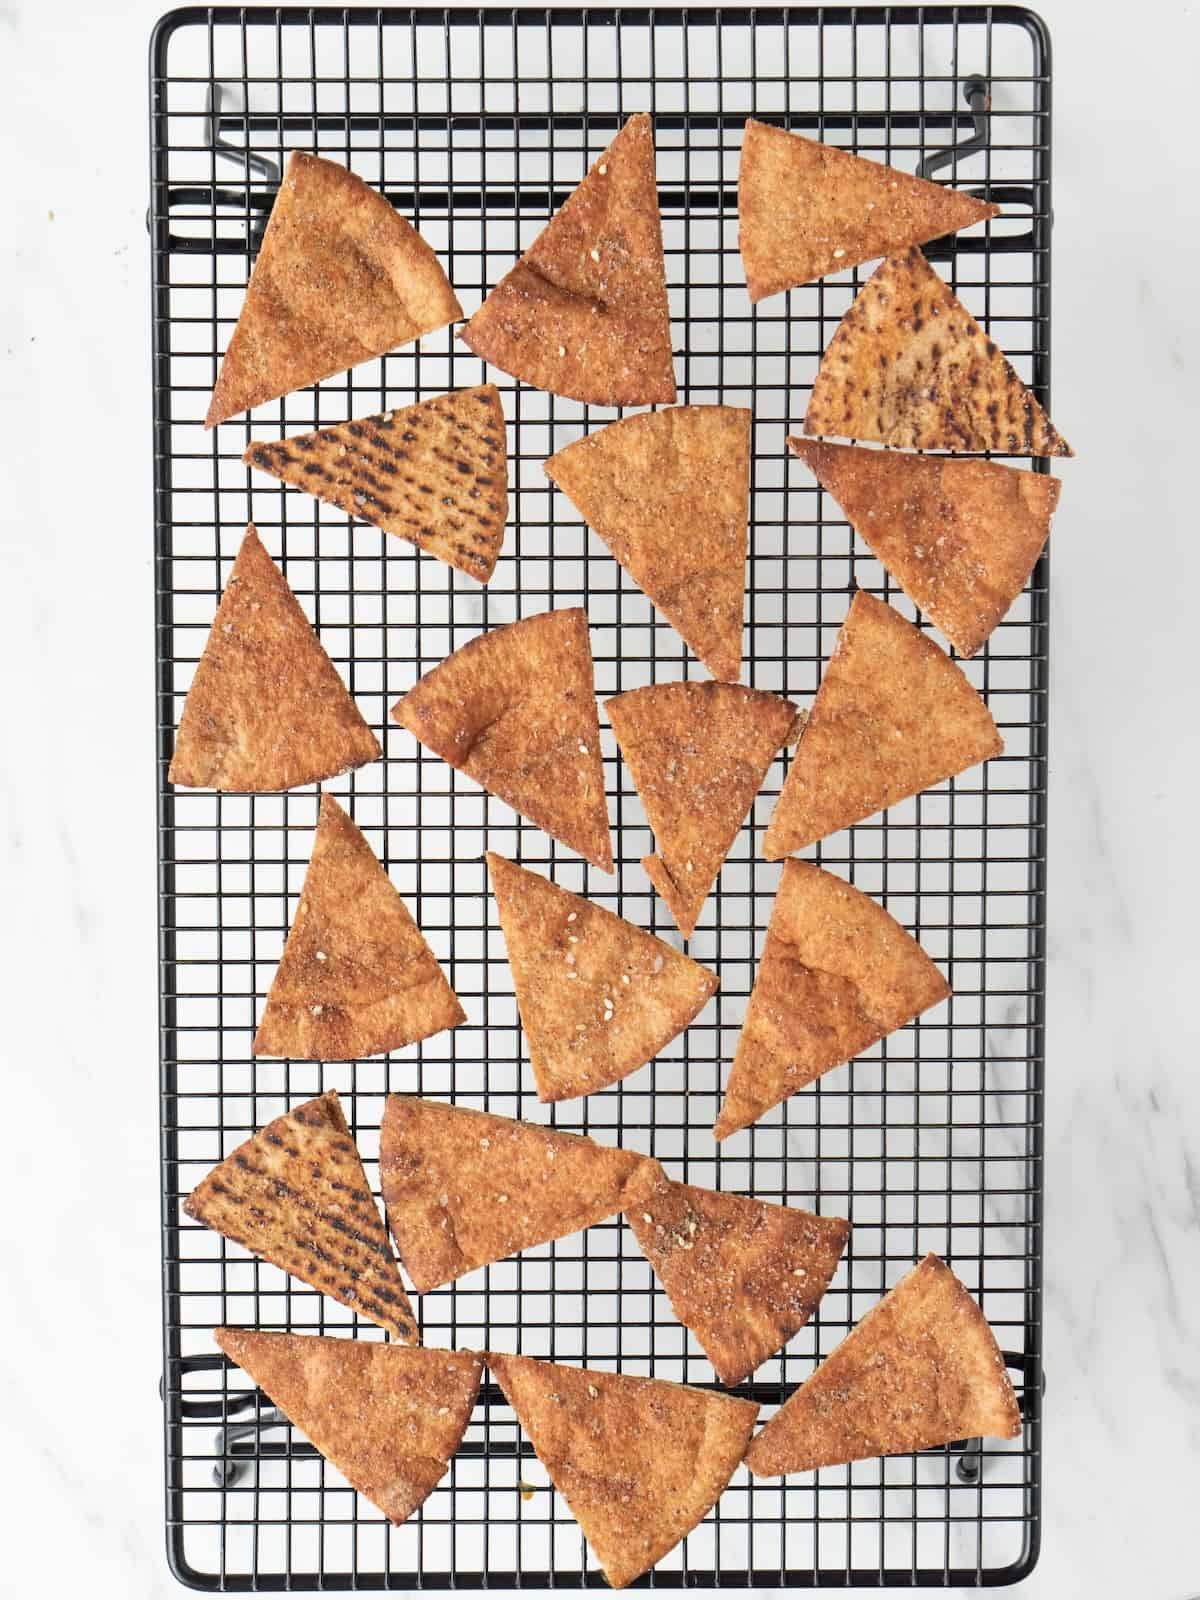 A wire rack with pita wedges baked into chips, fresh out of the oven being cooled on the rack.